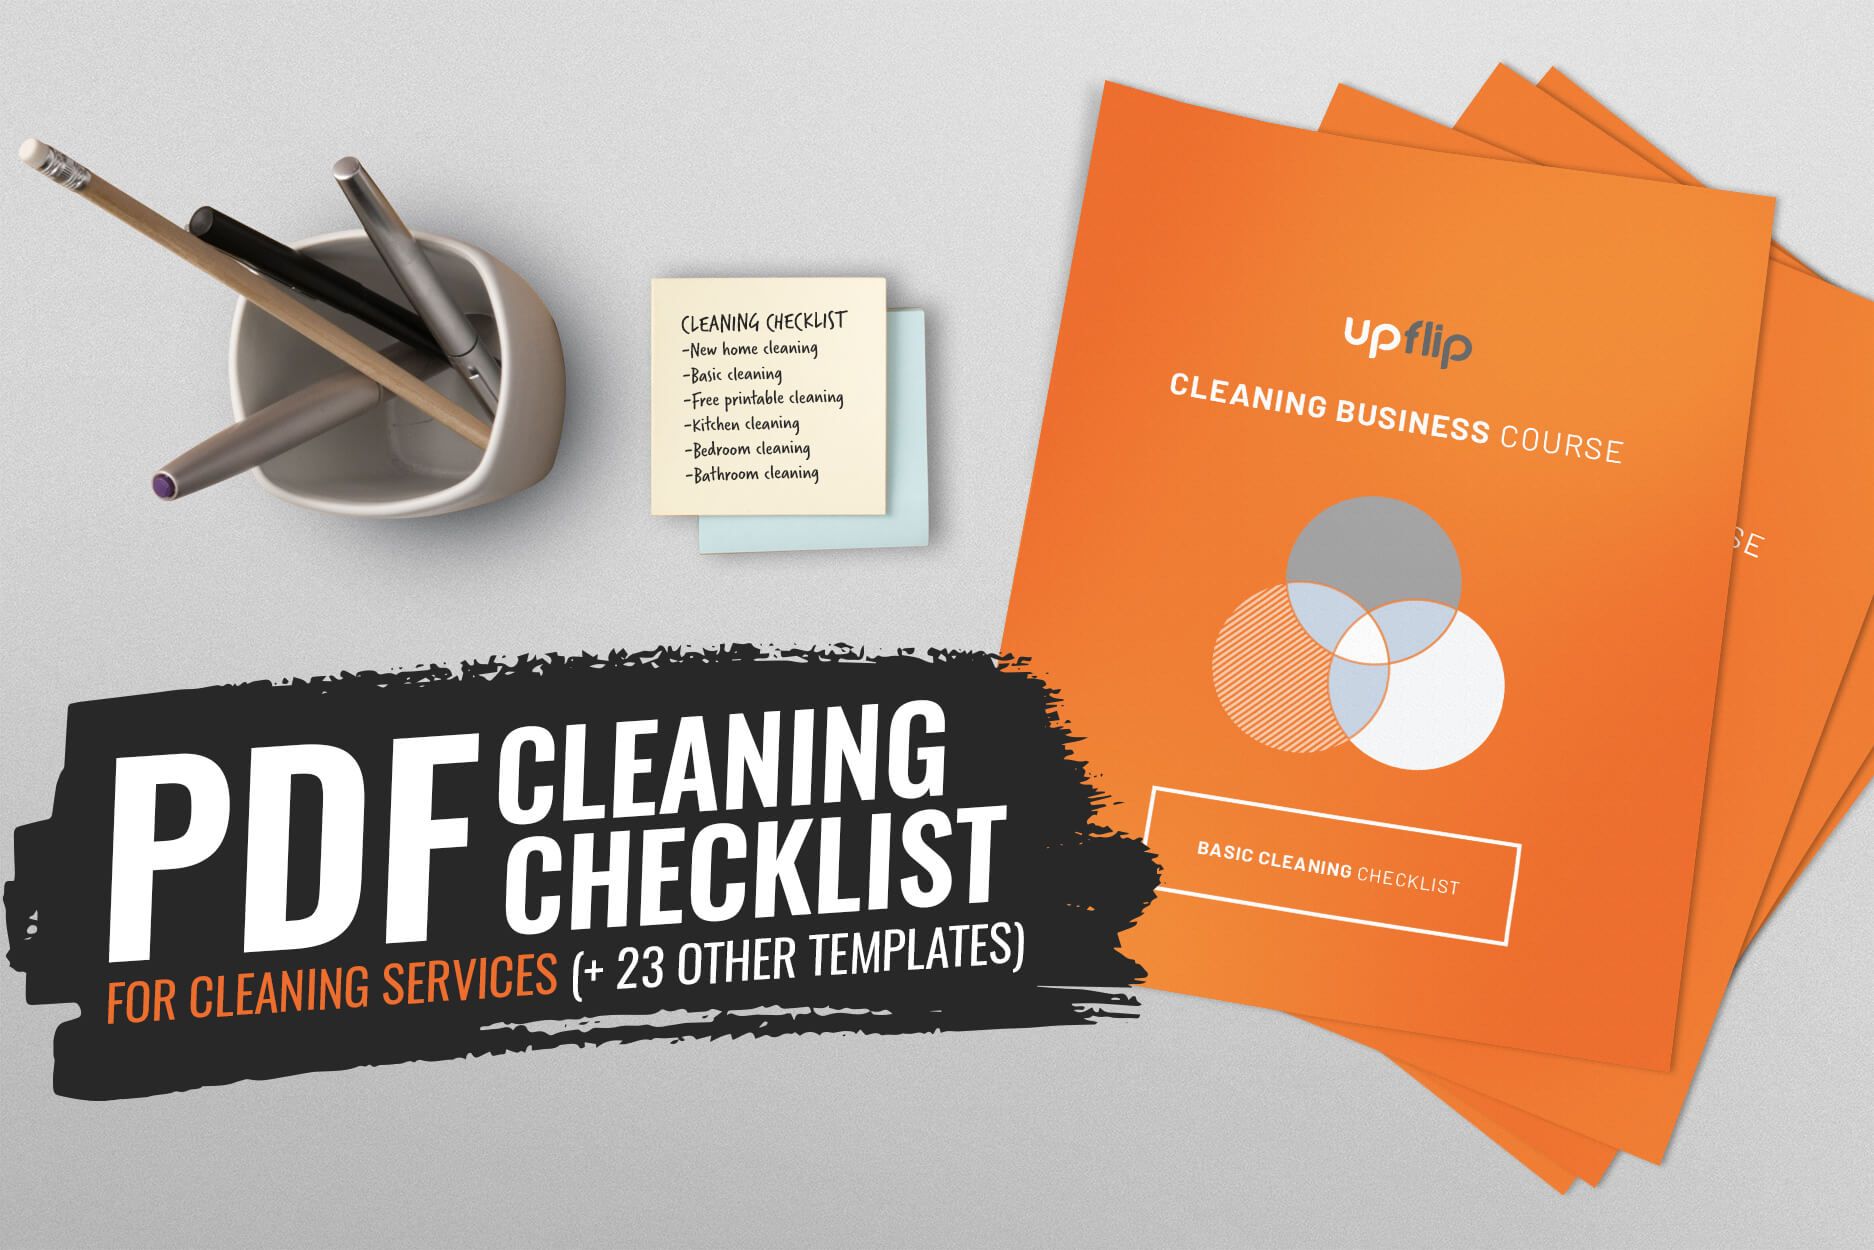 https://c5ab8b64.flyingcdn.com/wp-content/uploads/2022/12/PDF-Cleaning-checklist-for-cleaning-services.jpg